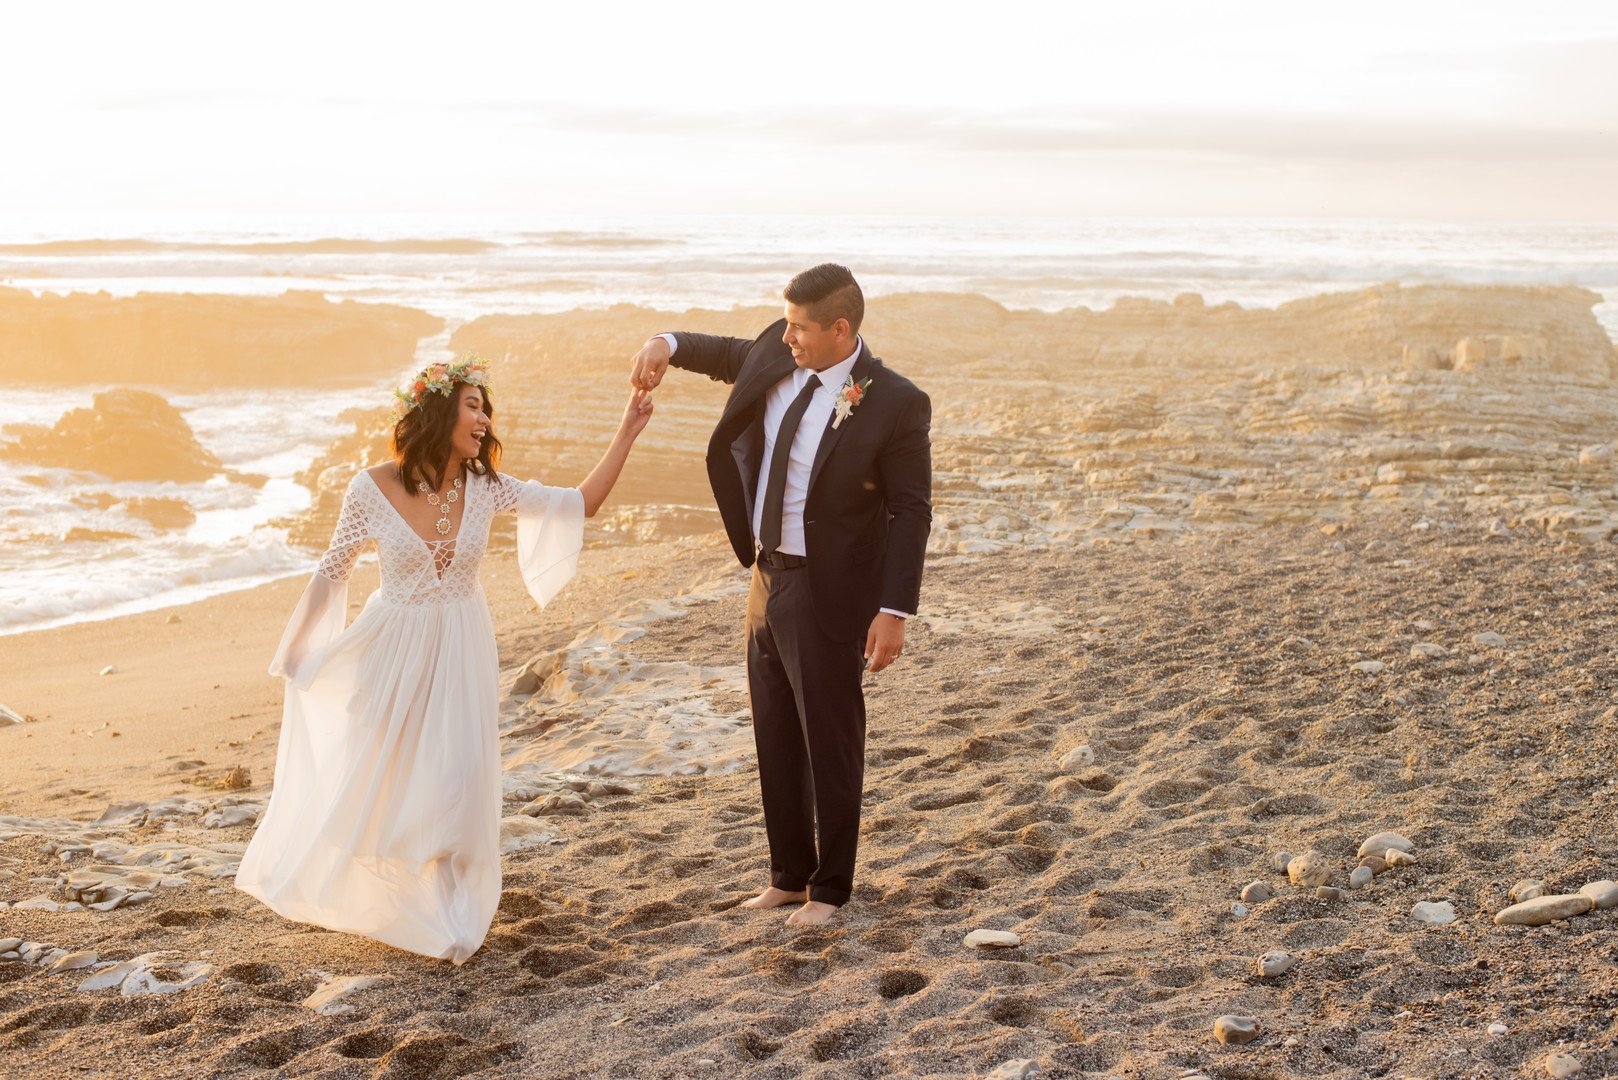 www.santabarbarawedding.com | Staci and Michael Photography | Montana de Oro State Park | EverAfter Wood Floral | Express | Makeup by Madisen Wickliffe | Bride and groom on beach